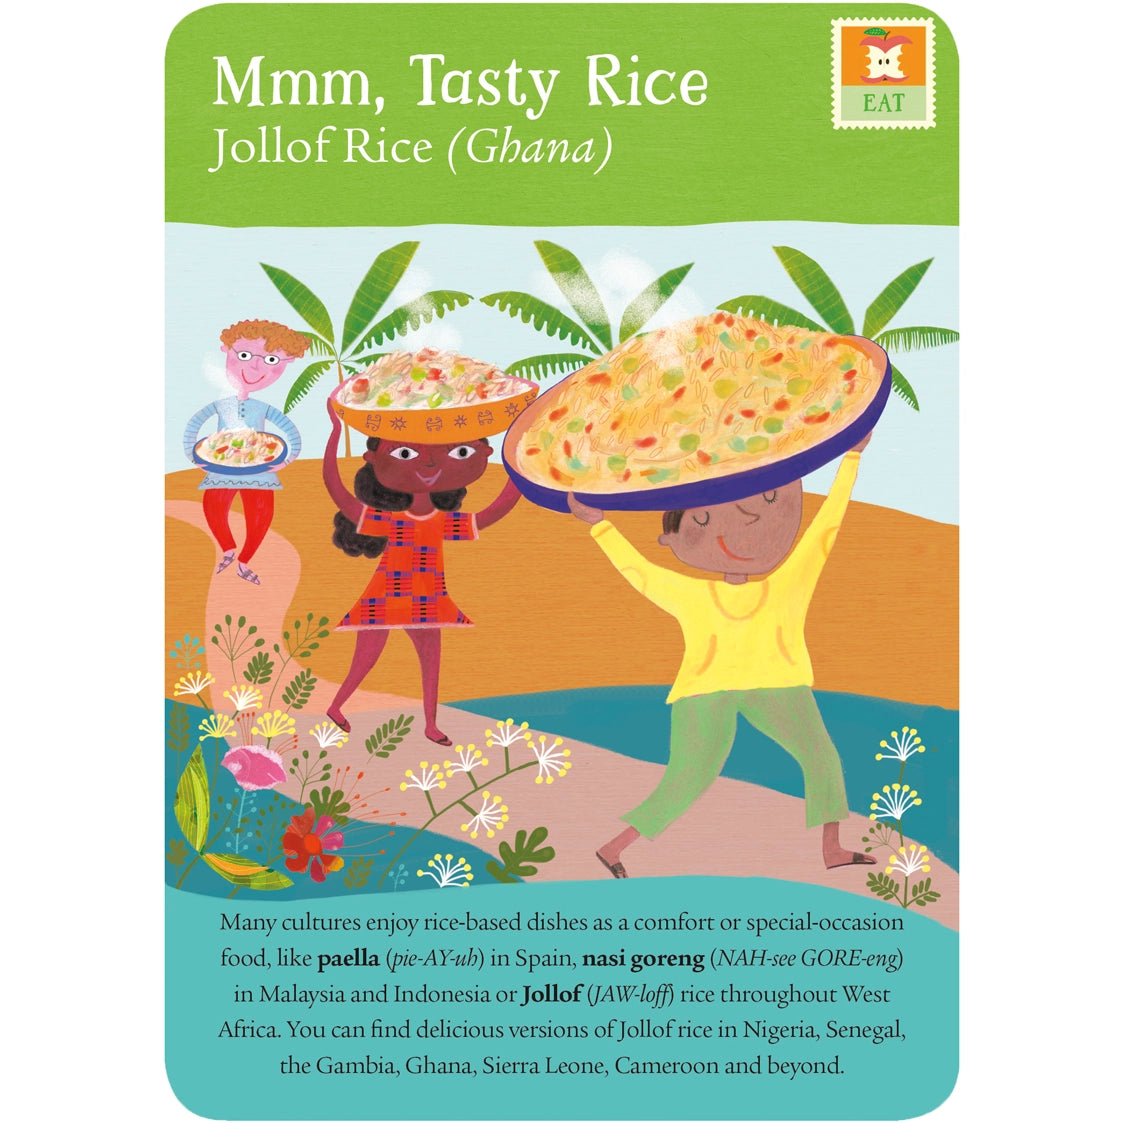 Global Kids - Children's Activity Cards by Barefoot Books. Activities for children from around the world.